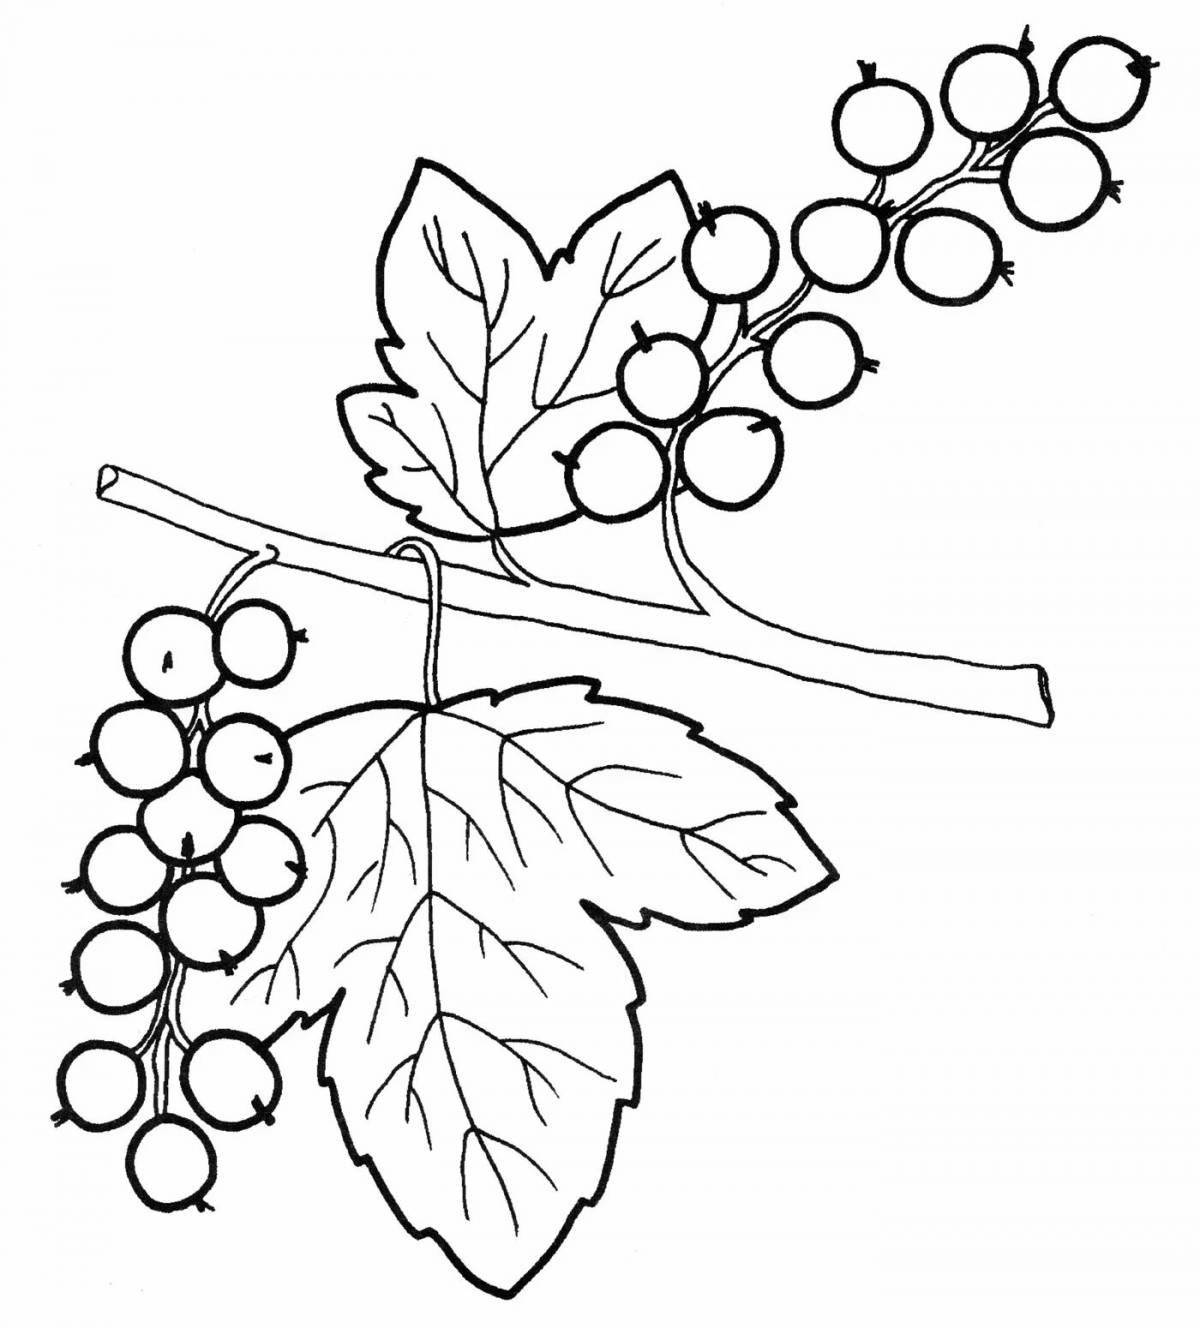 Bright cherry bird coloring pages for kids